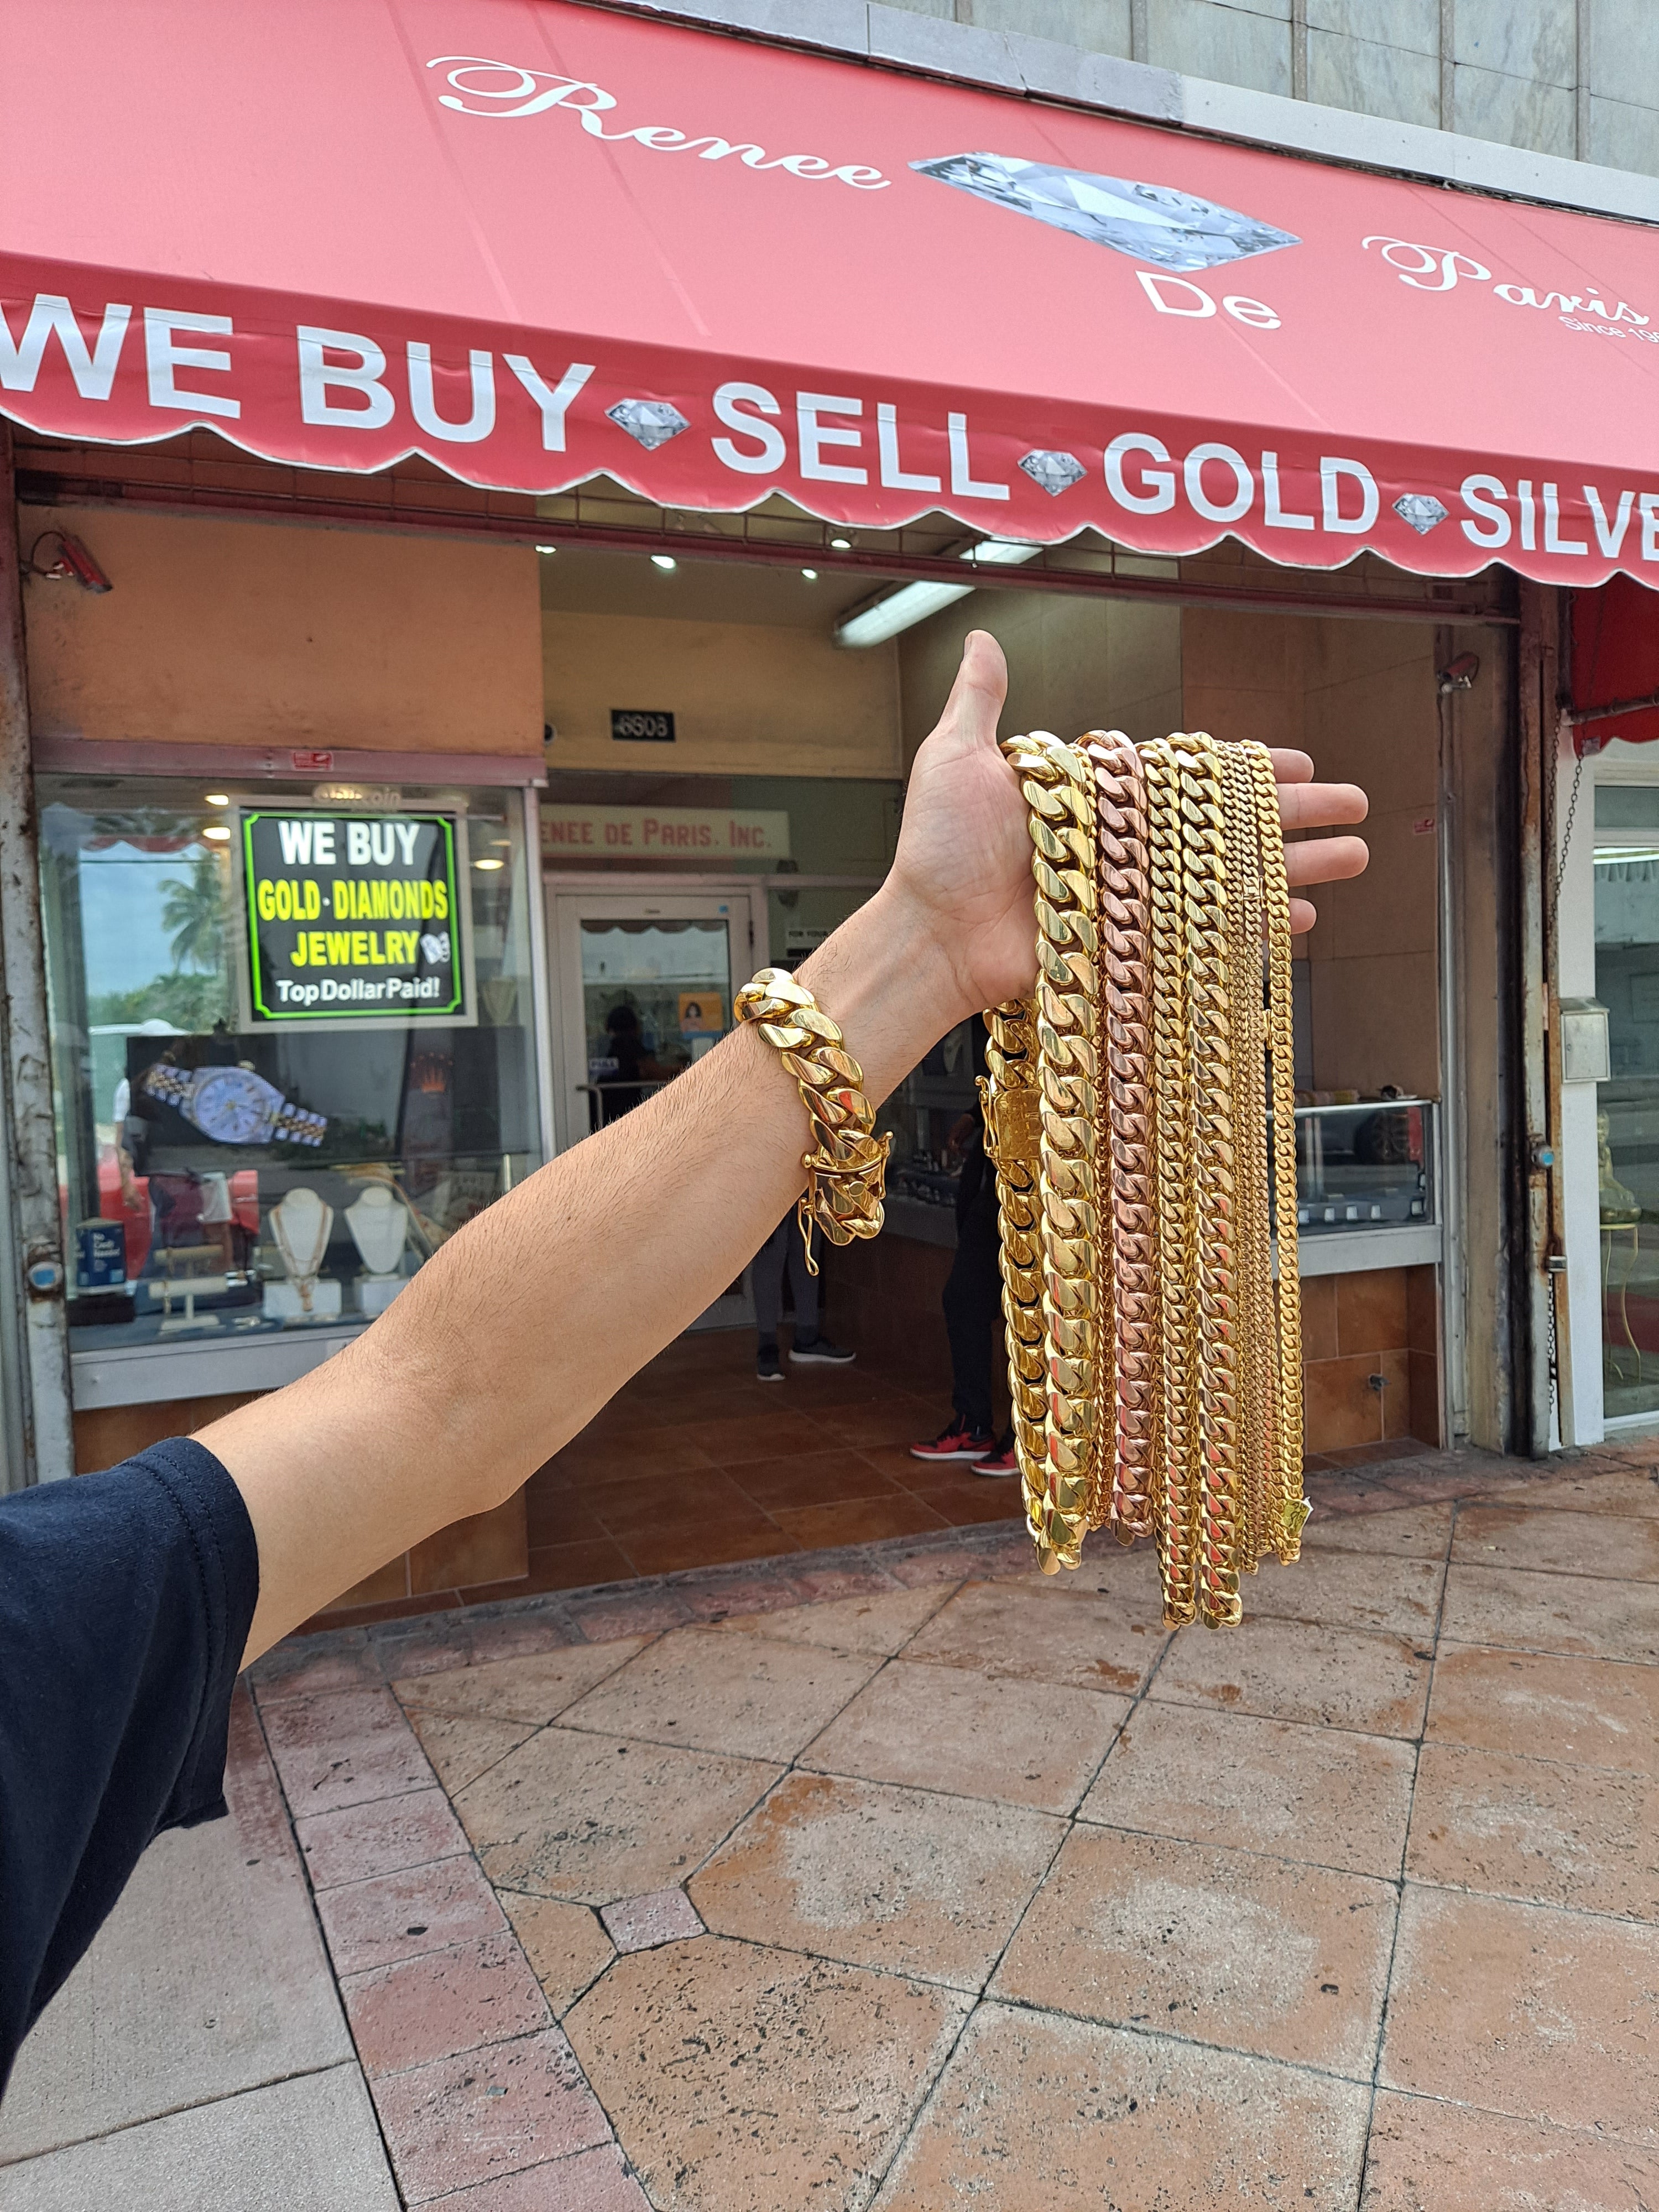 14k miami cuban link 4.80mm,30 grams,22 inches